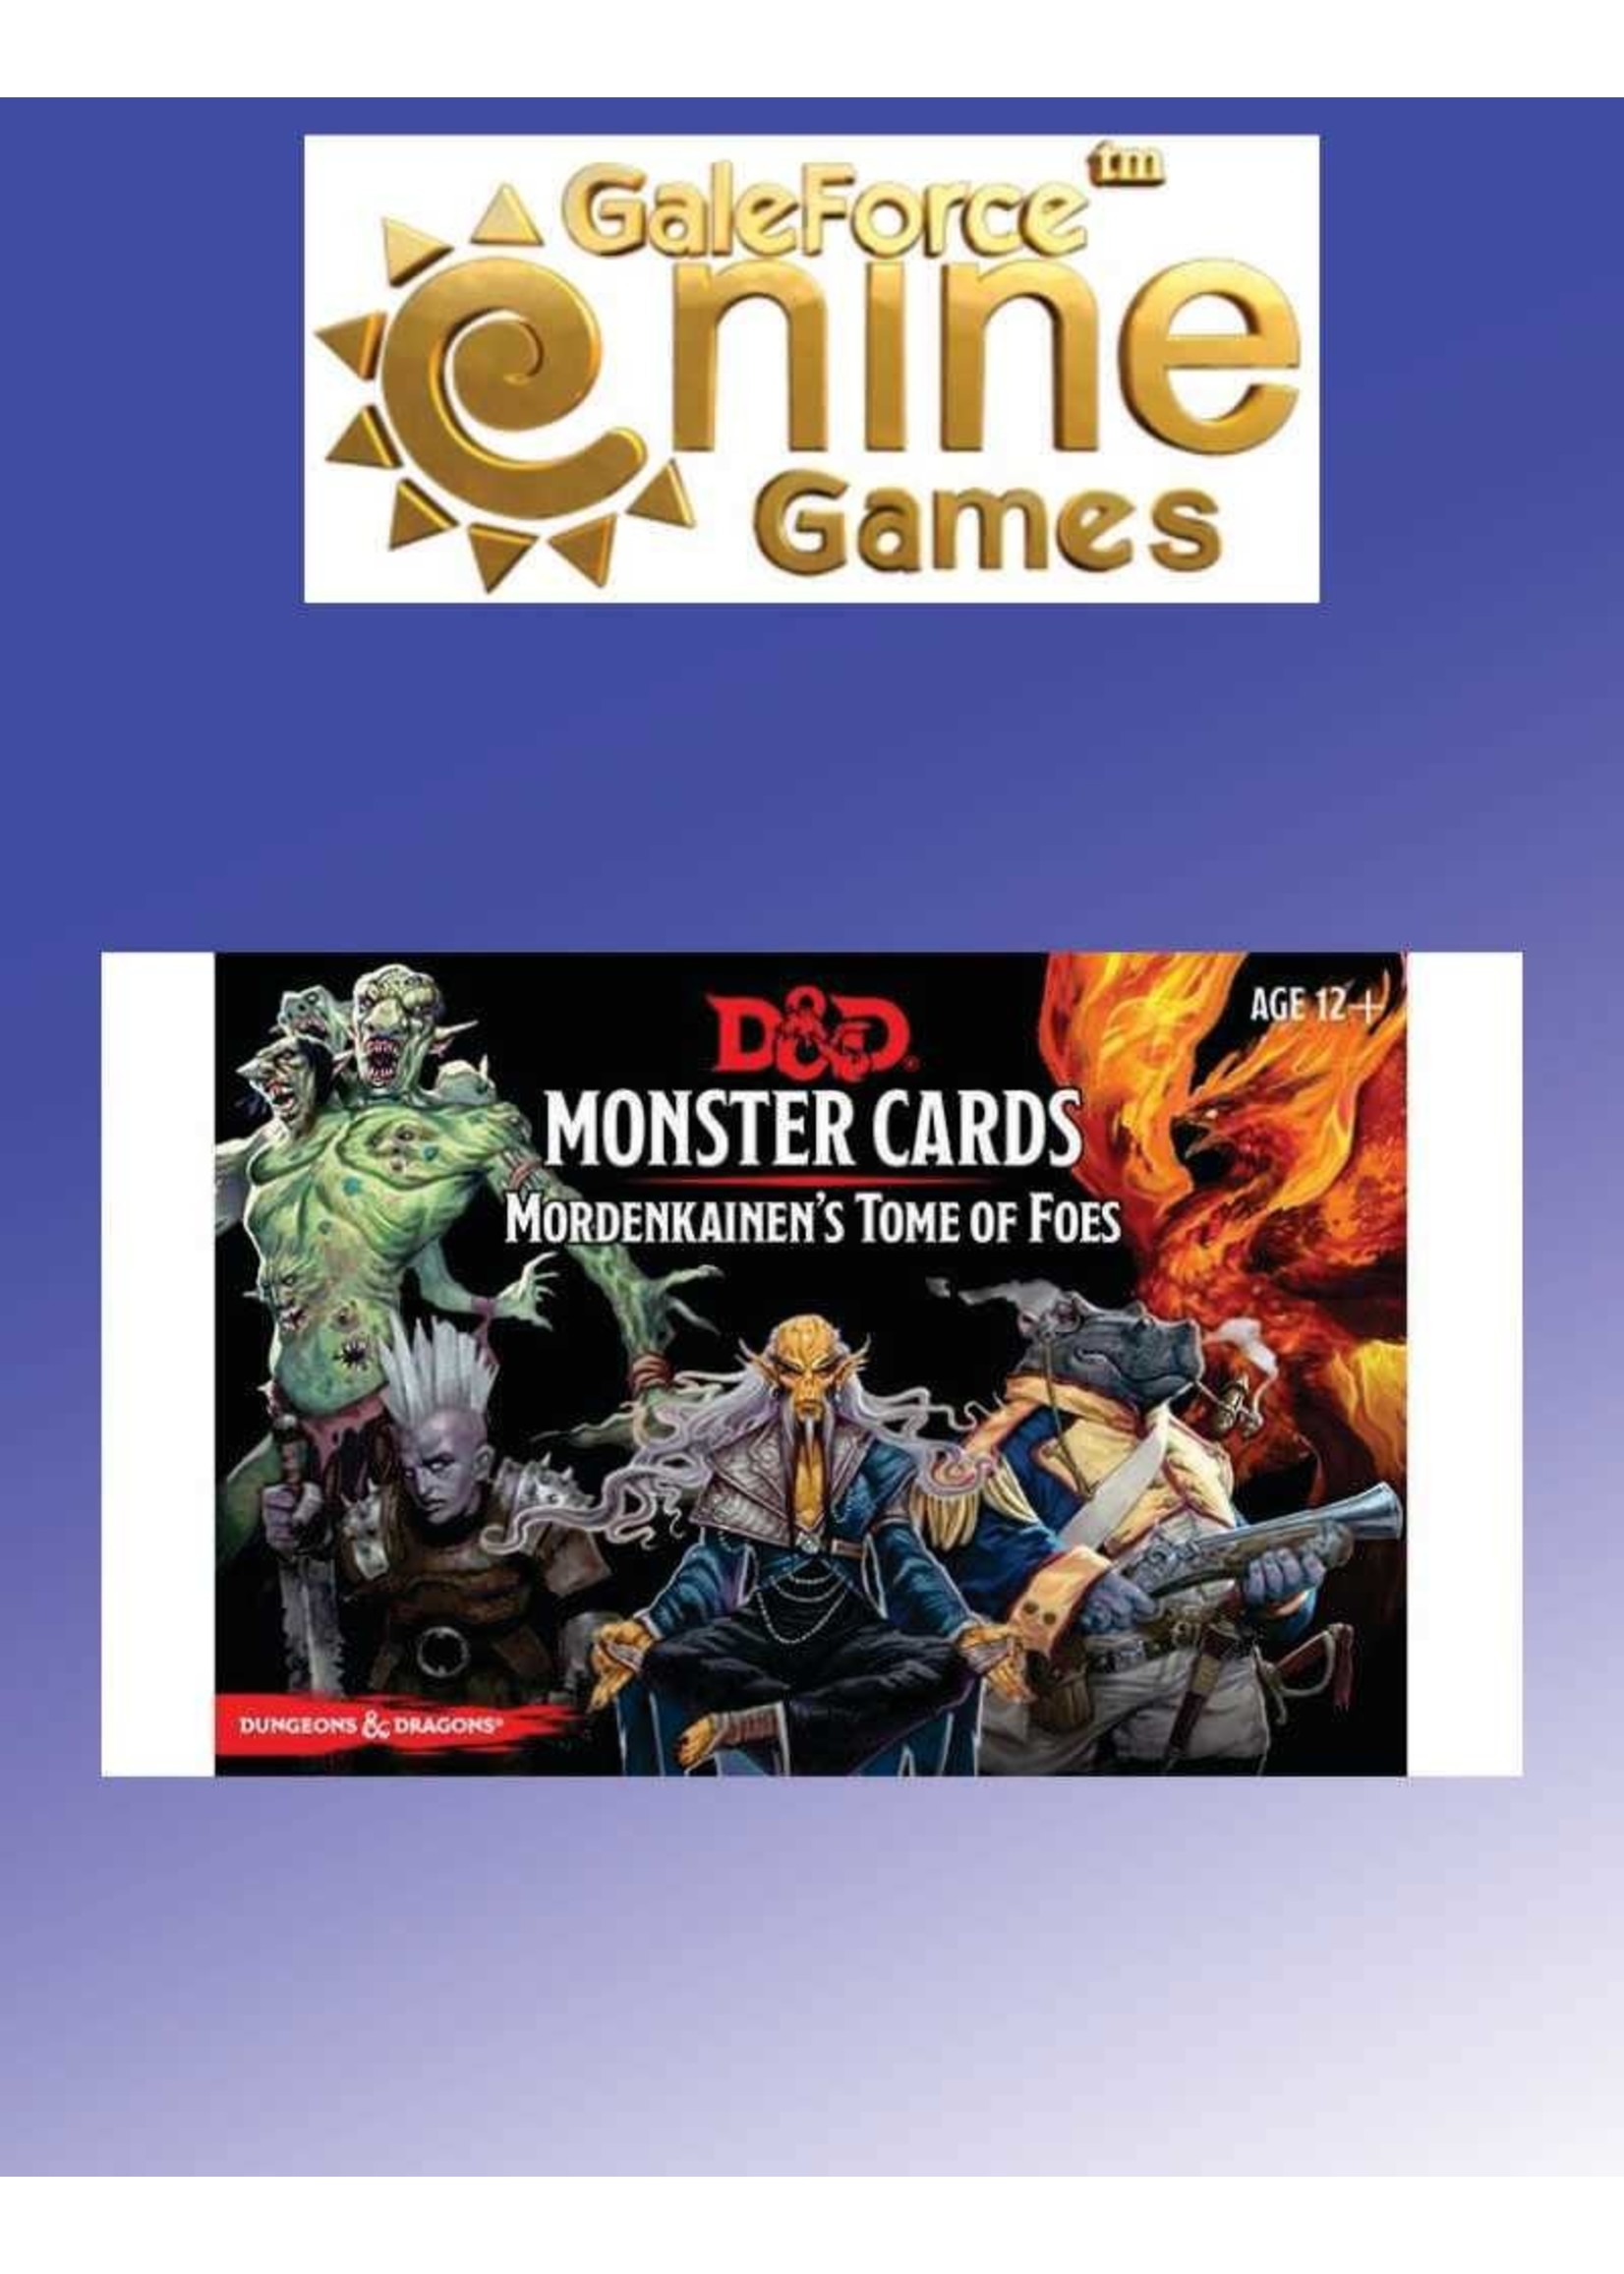 Gale Force Nine D&D Monster Cards Mordenkainen's Tome of Foes